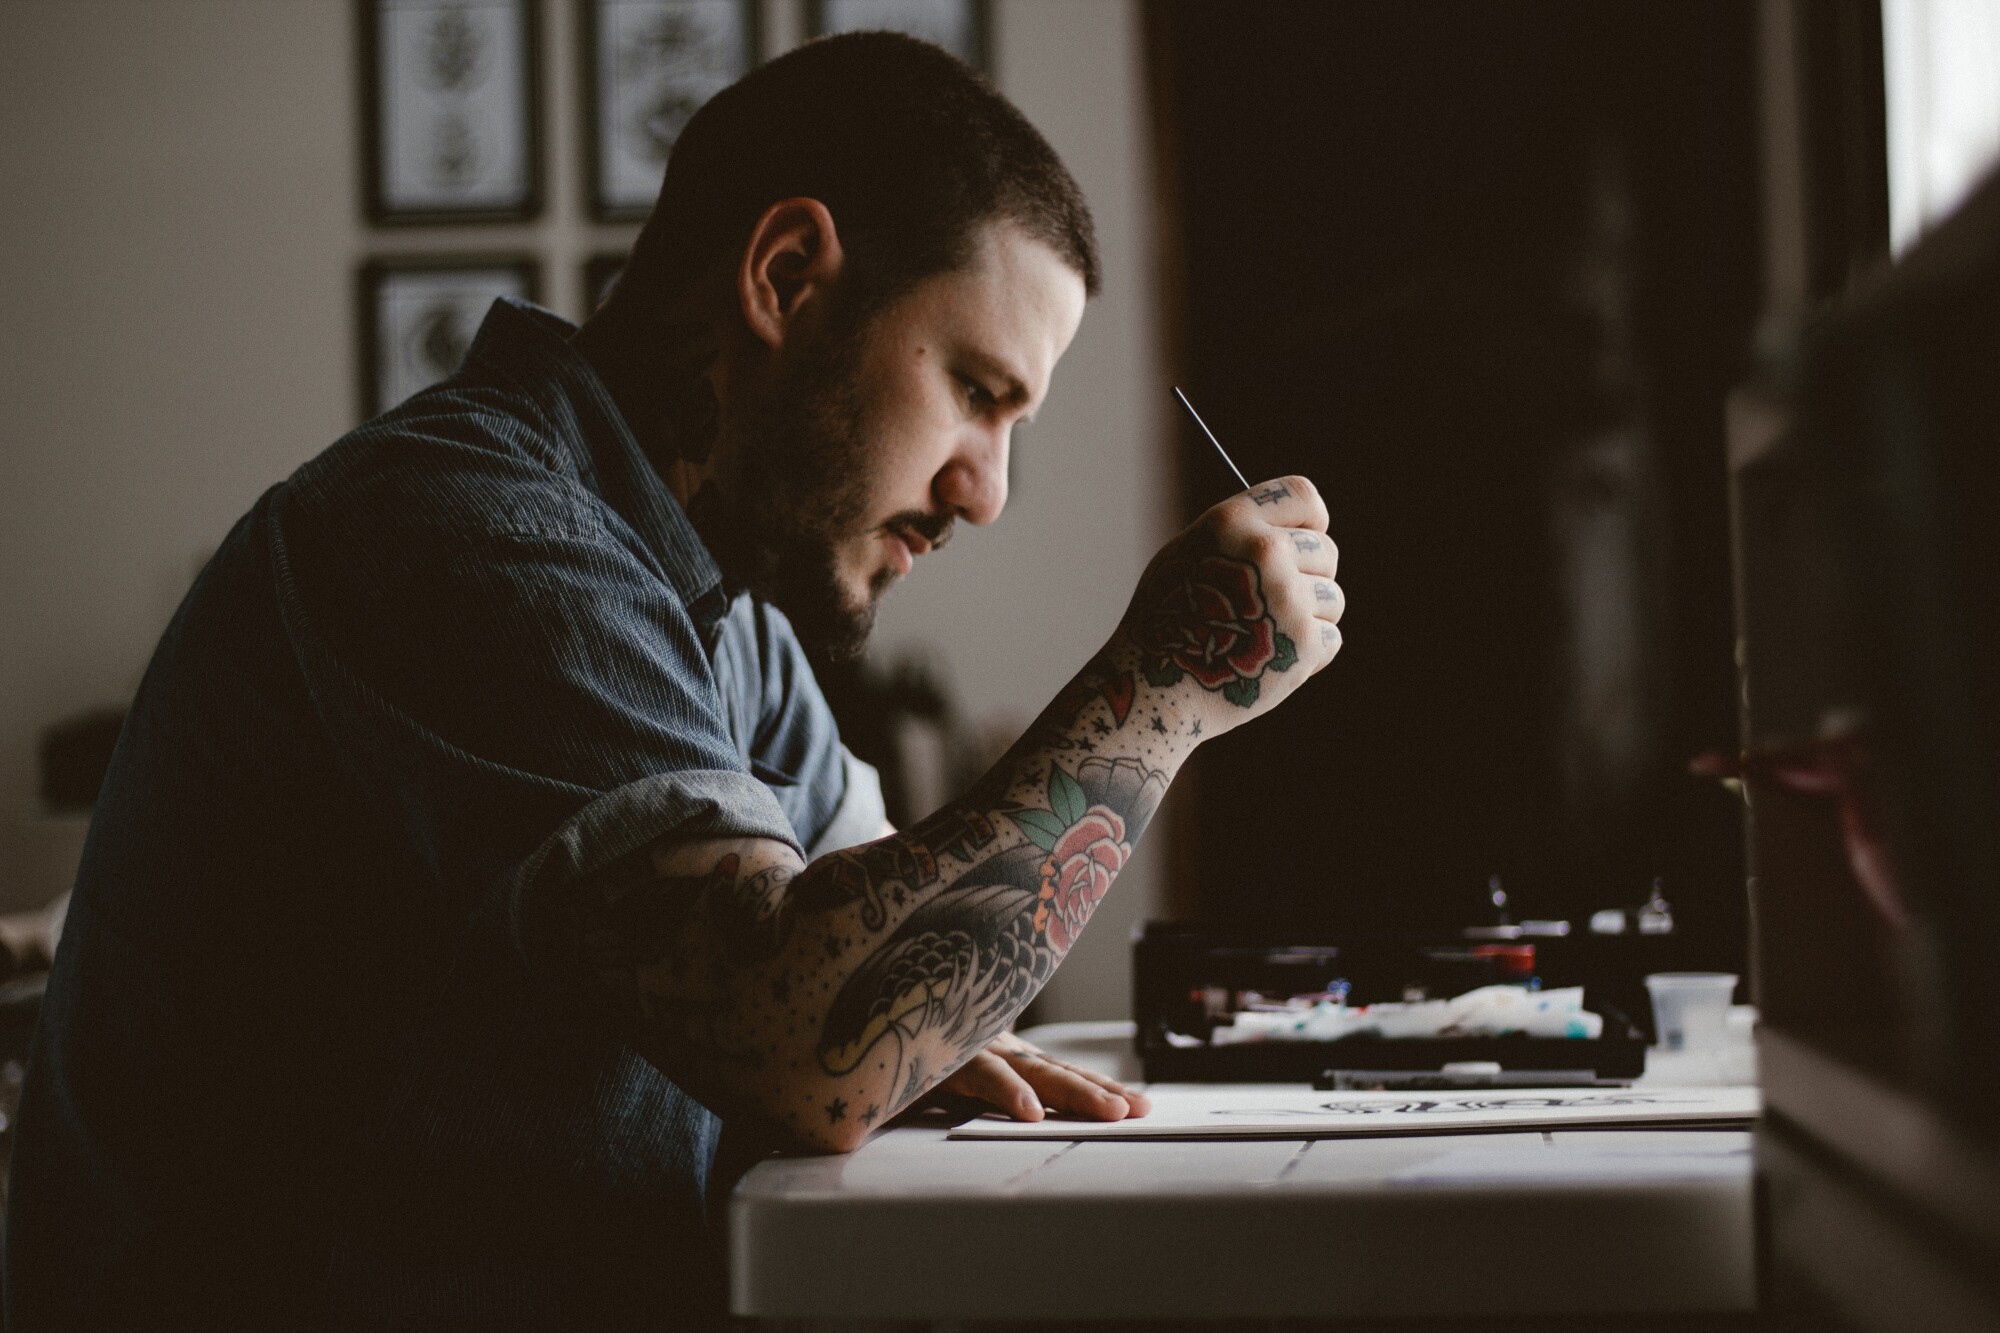 Man with tattoo on arm - a tattoo artist reading a paper on a desk.